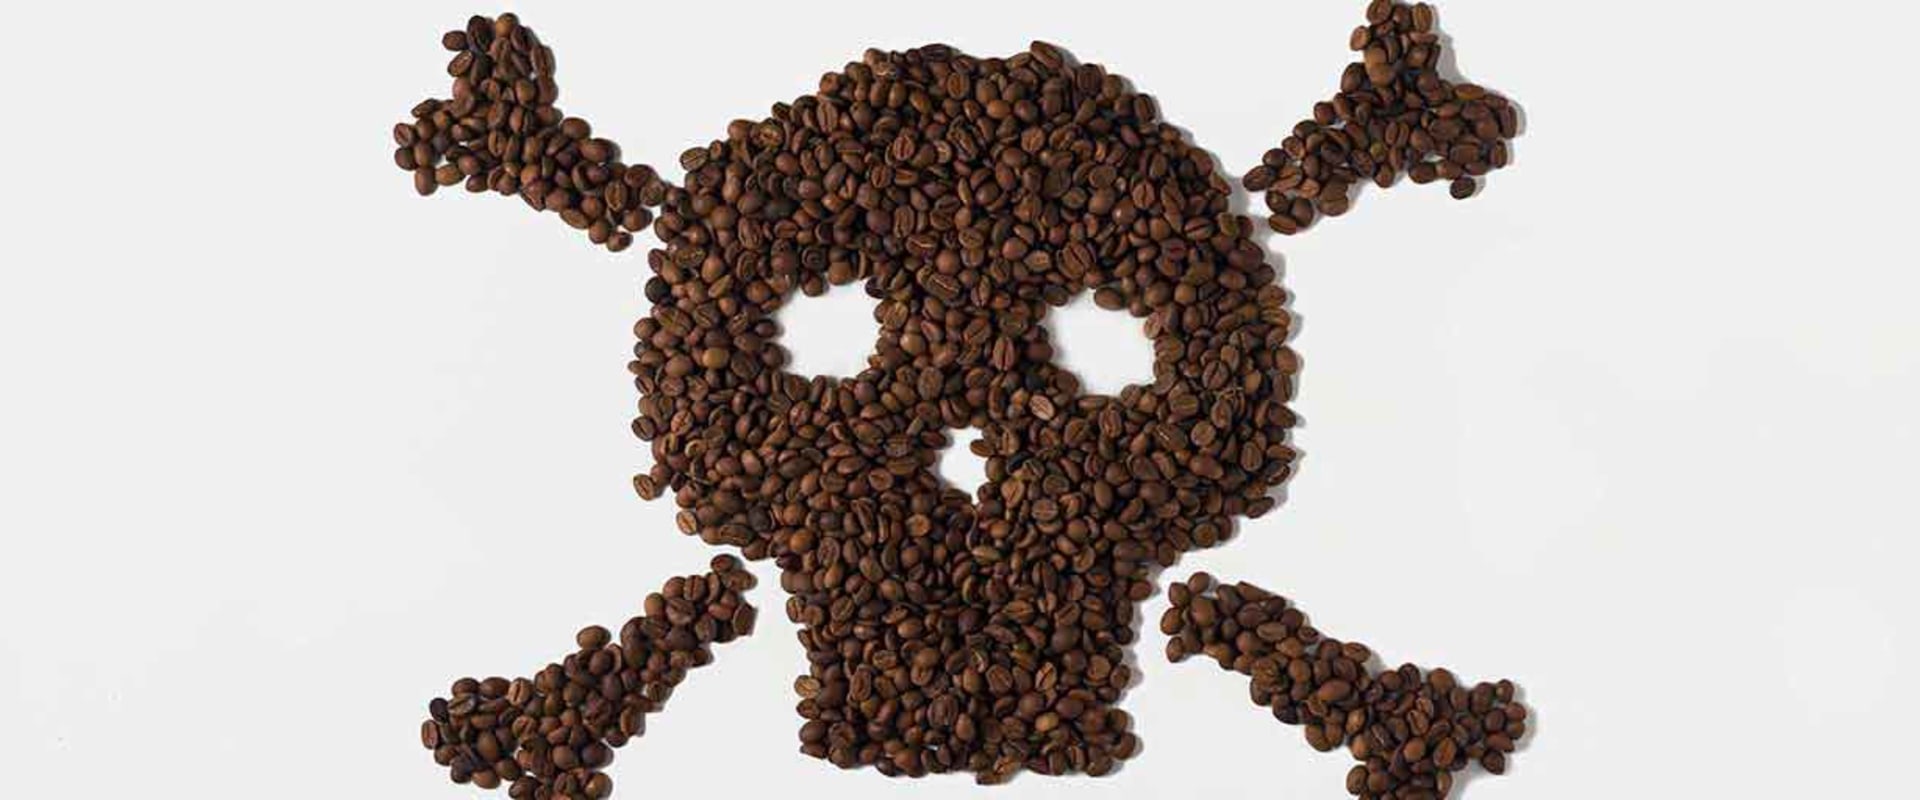 Negative Side Effects of Coffee: What You Need to Know